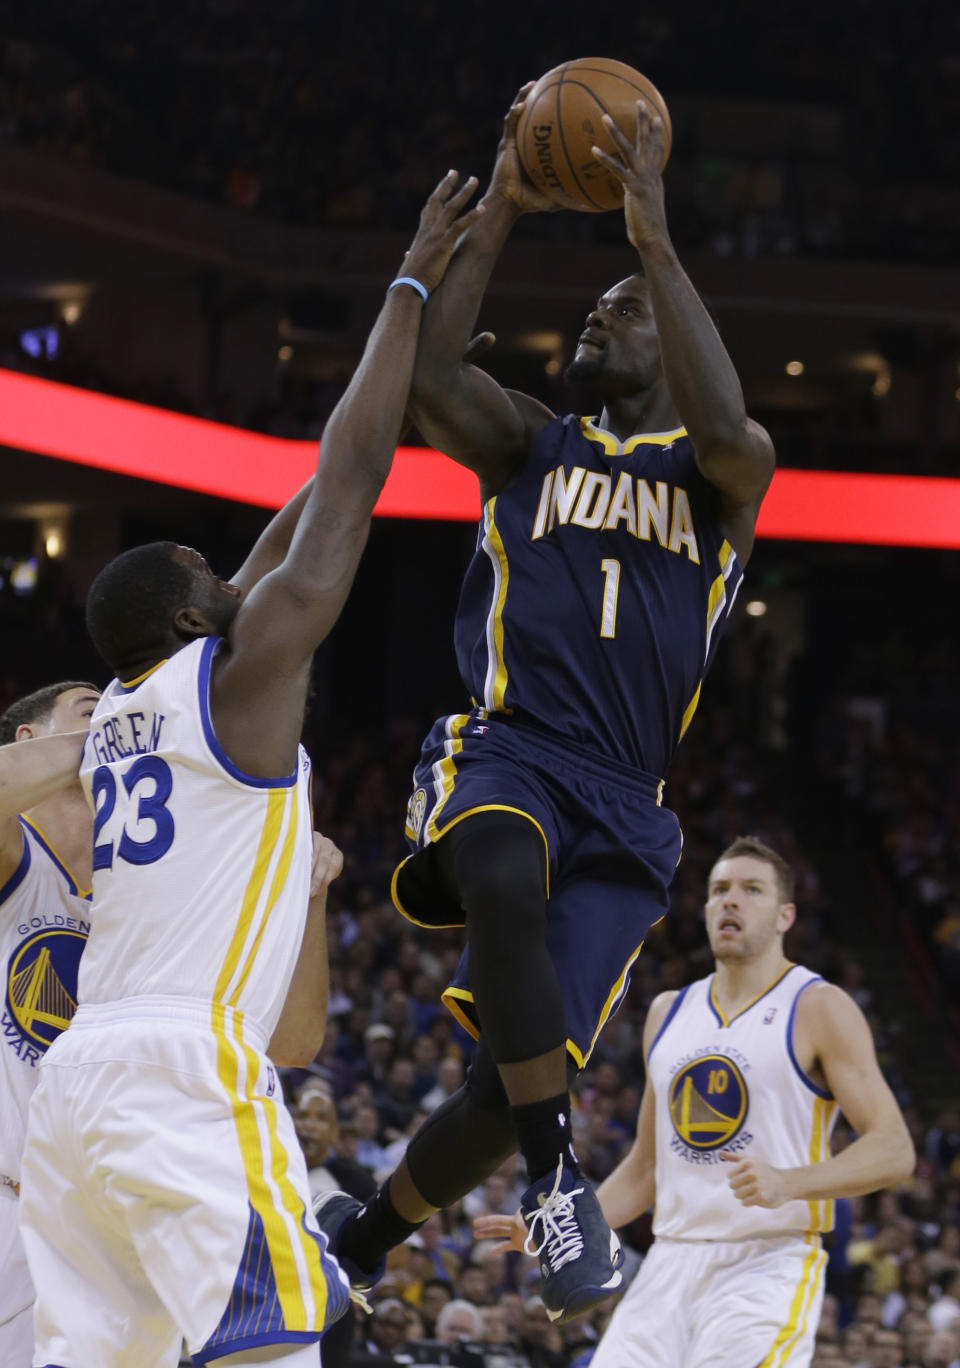 Indiana Pacers' Lance Stephenson (1) shoots against Golden State Warriors' Draymond Green (23) during the first half of an NBA basketball game, Monday, Jan. 20, 2014, in Oakland, Calif. (AP Photo/Ben Margot)